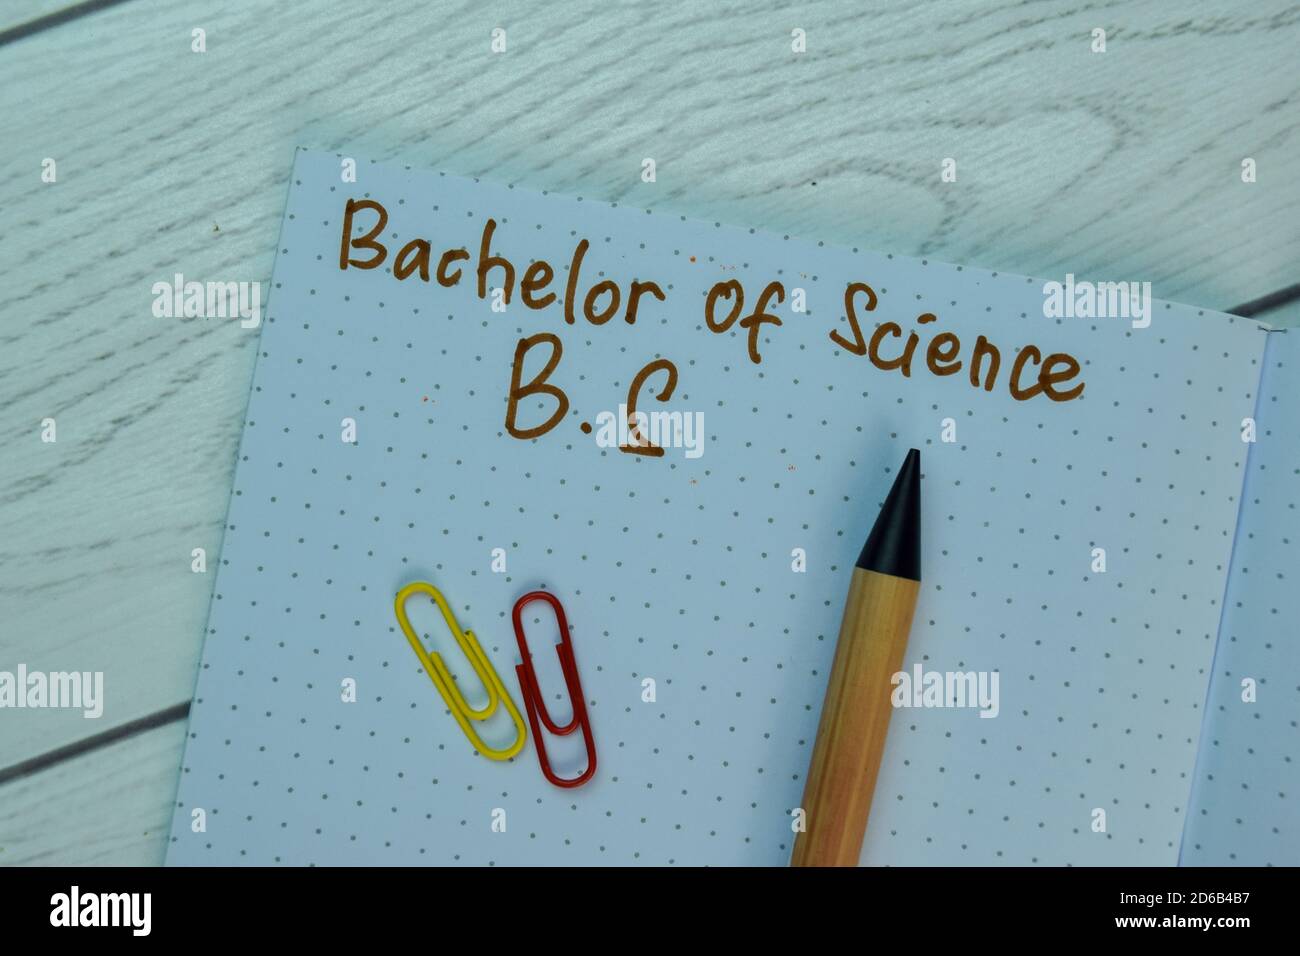 Bachelor of Science - B.S write on a book isolated on office desk